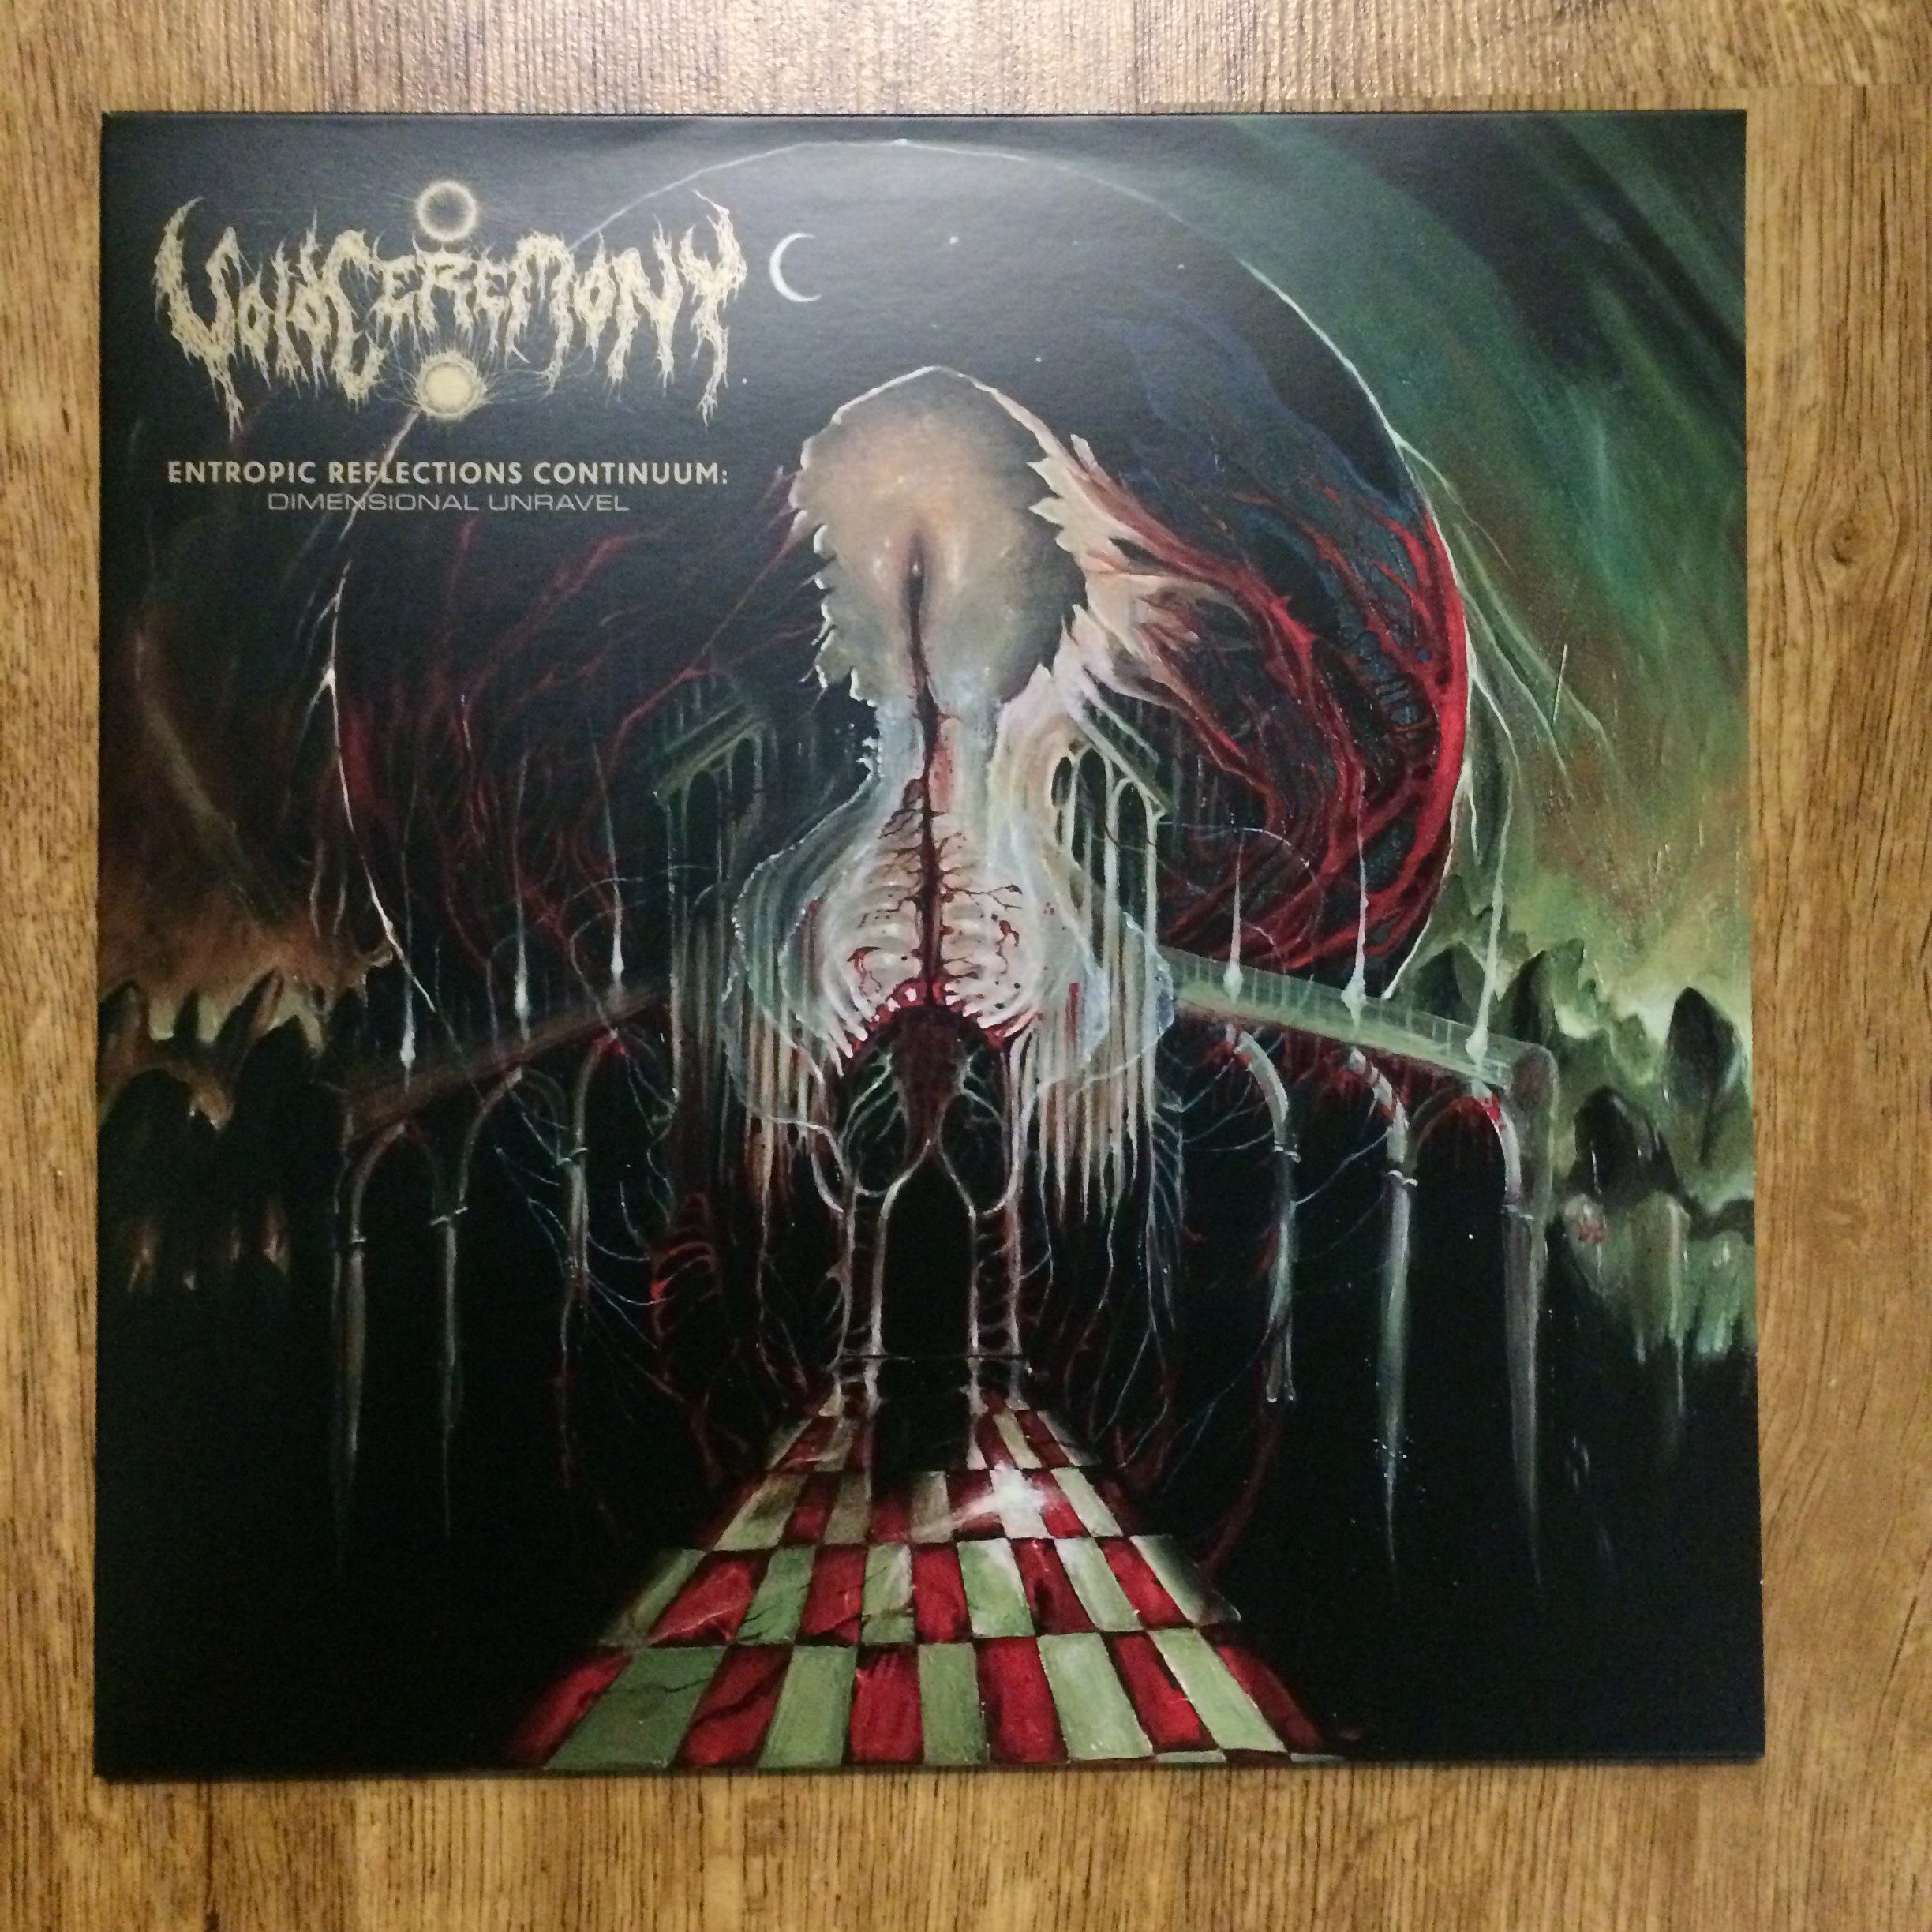 Photo of the Void Ceremony - "Entropic Reflections Continuum: Dimensional Unravel" CD